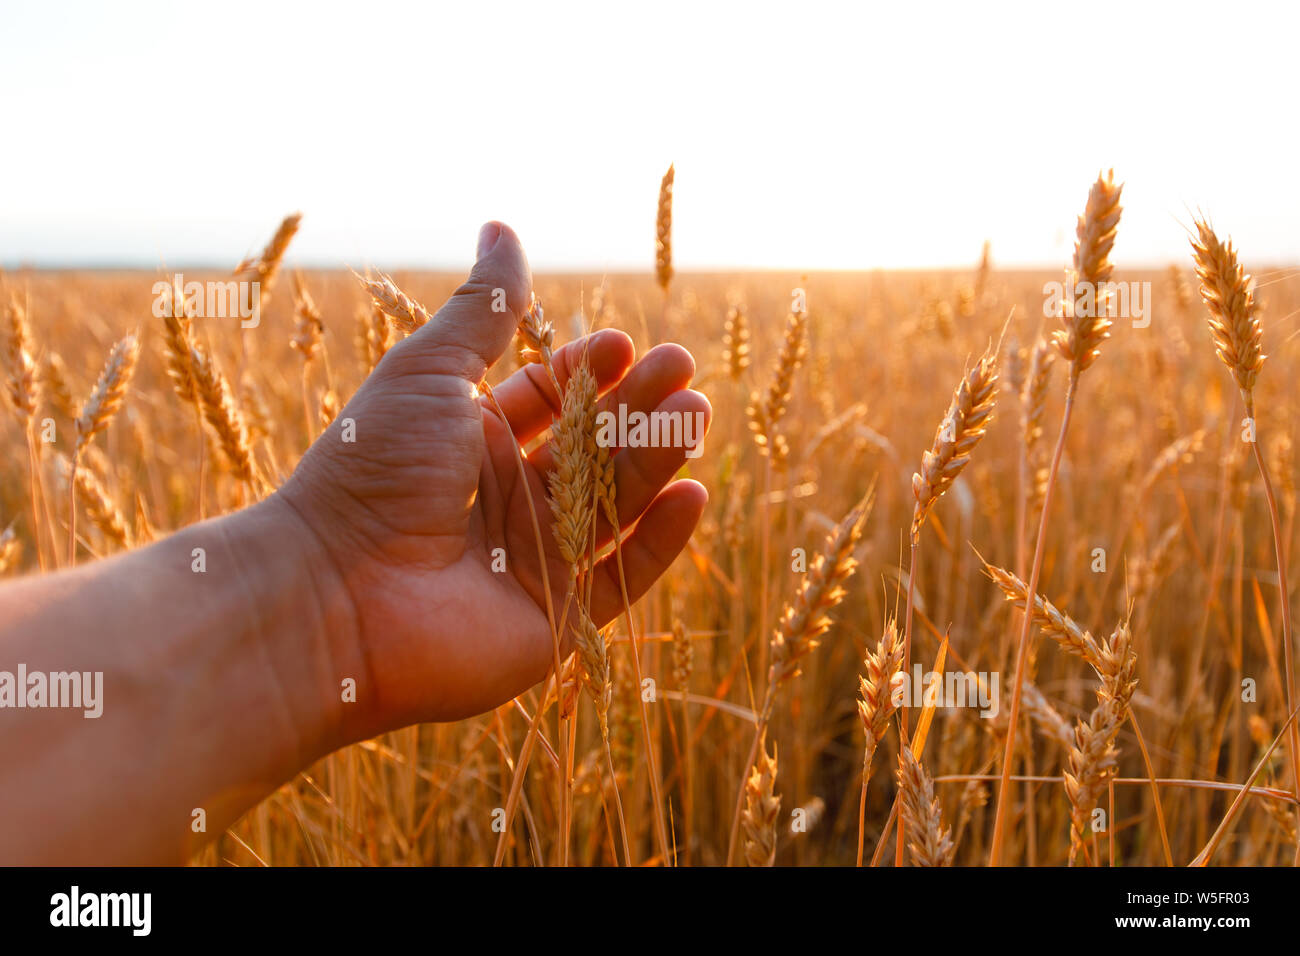 Farmers hand touches the ear of wheat at sunset. The agriculturist inspects a field of ripe wheat. farmer on wheat field at sunset. Stock Photo